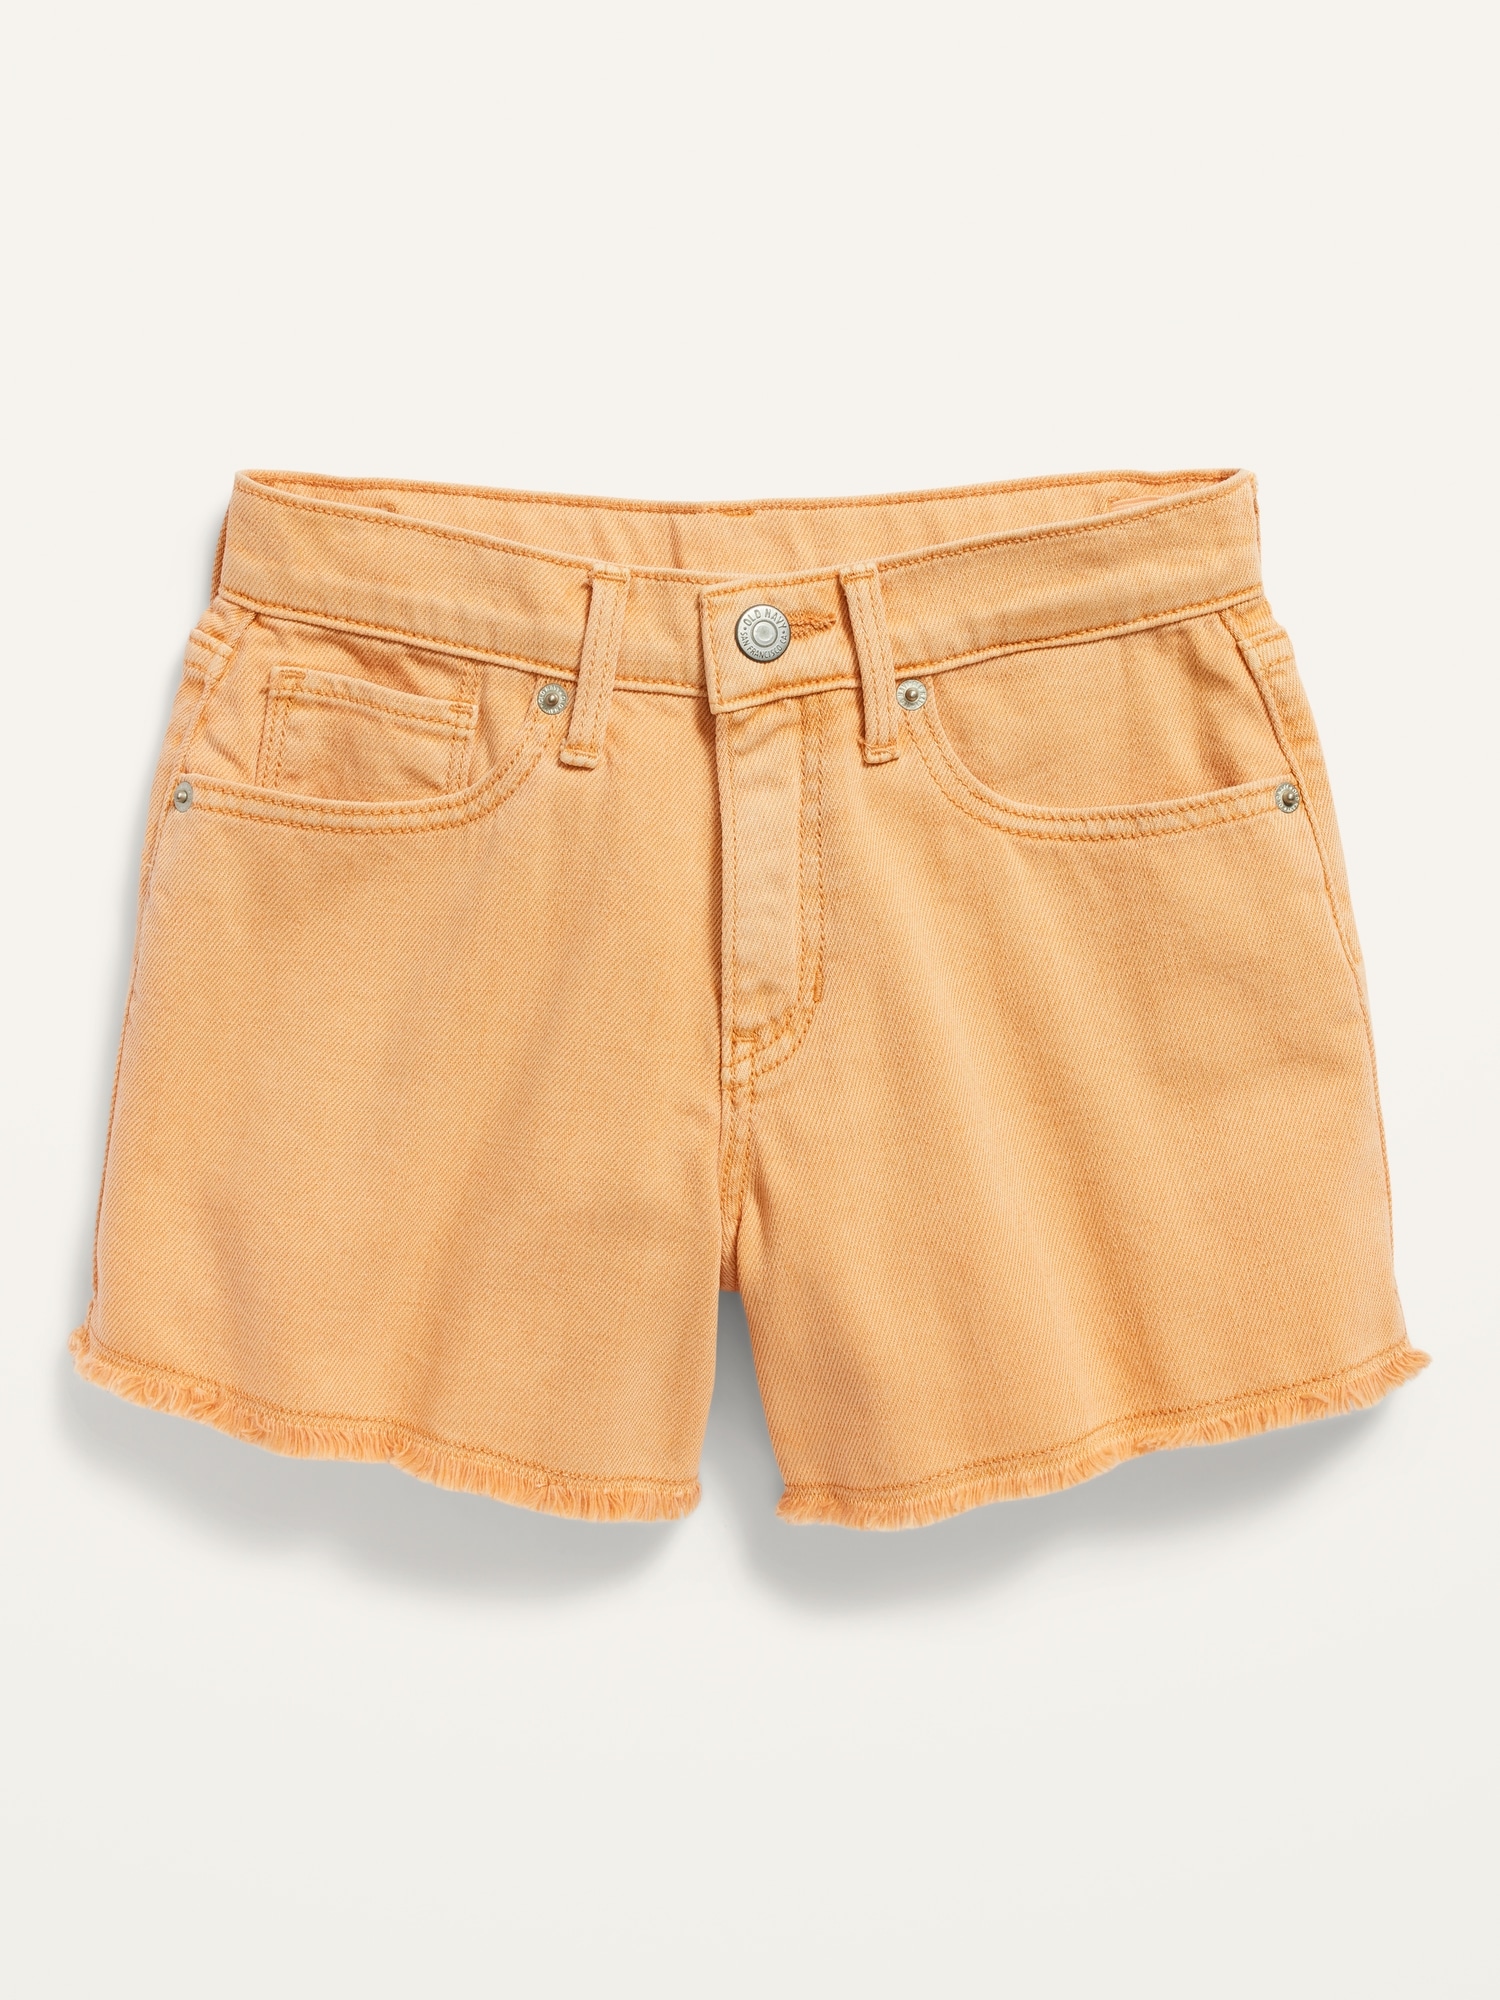 Extra High-Waisted Pop-Color Cut-Off Jean Shorts for Girls